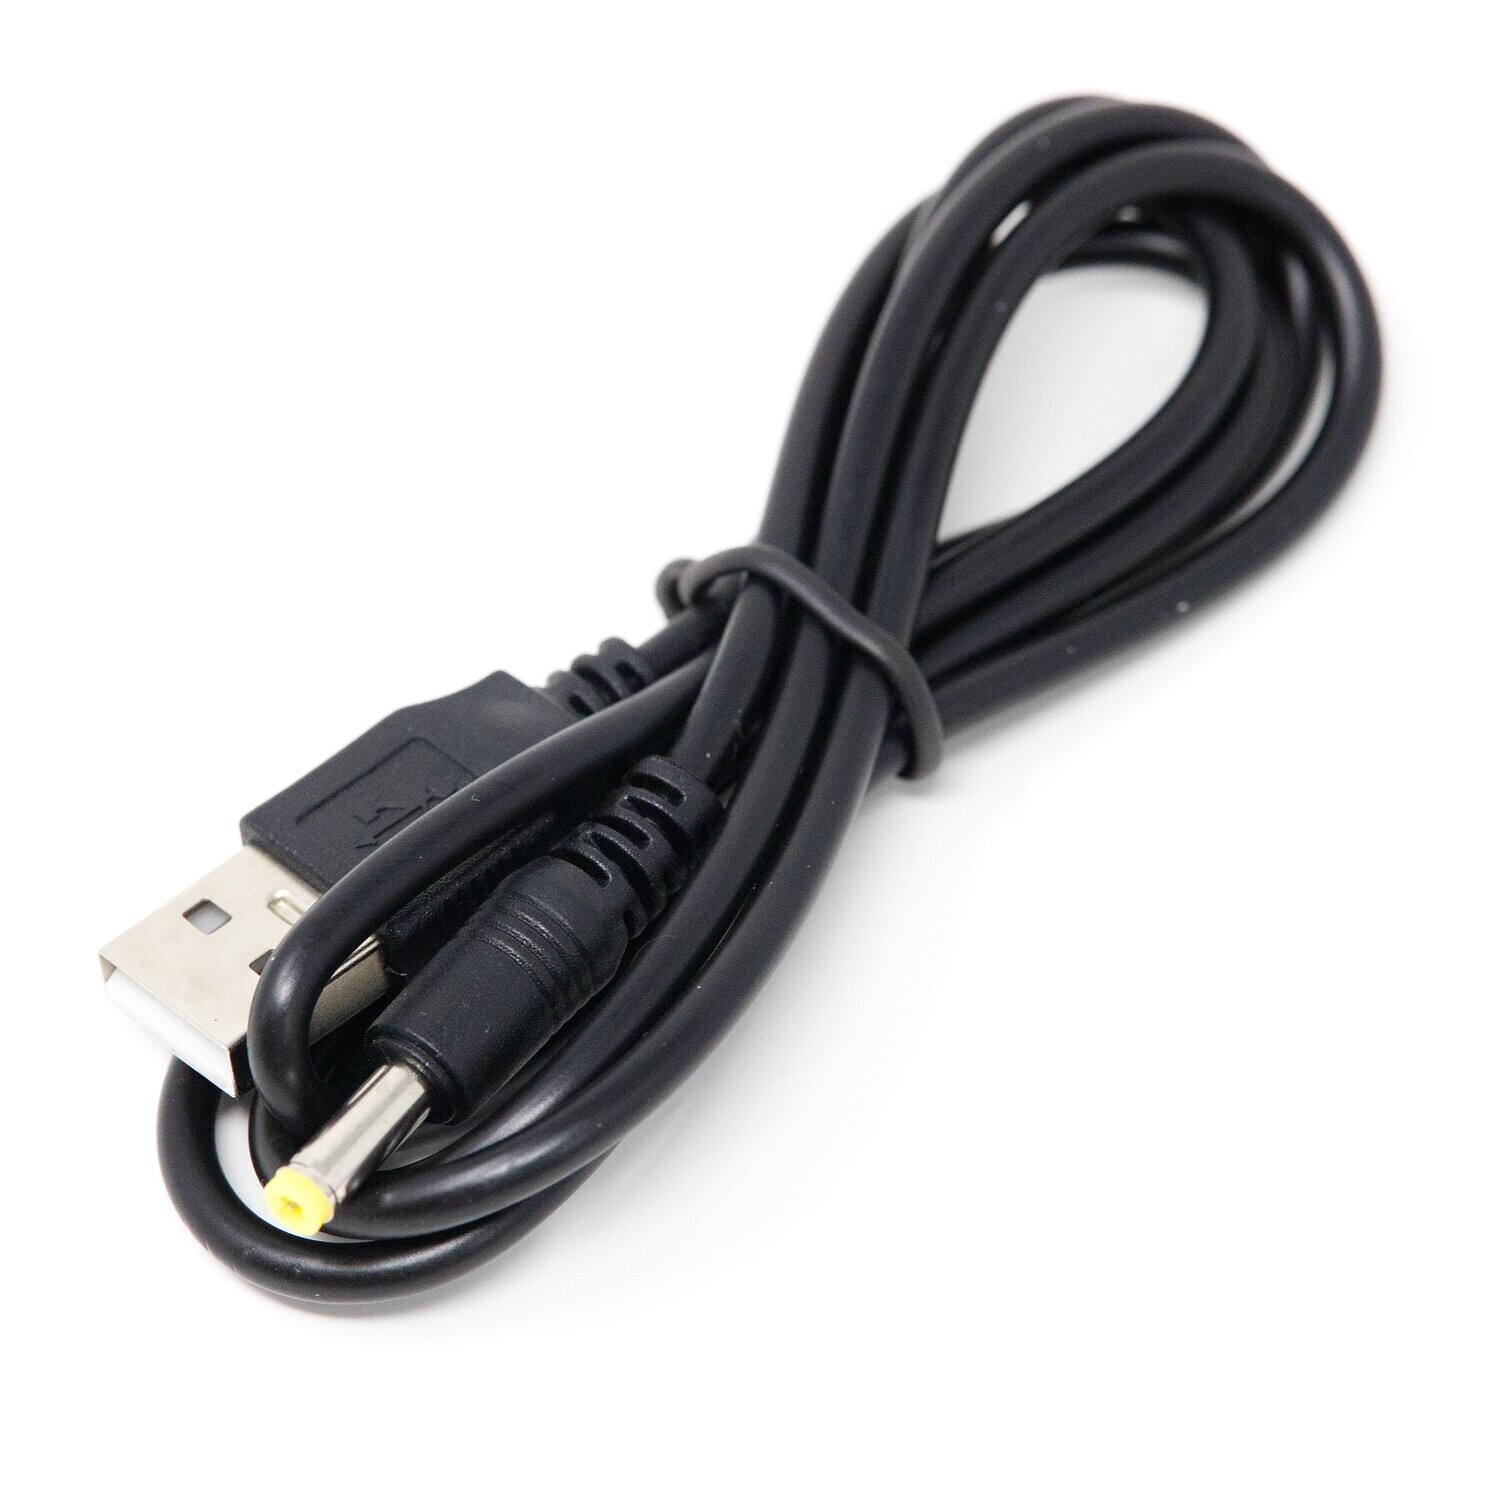 PSP Charge Cable